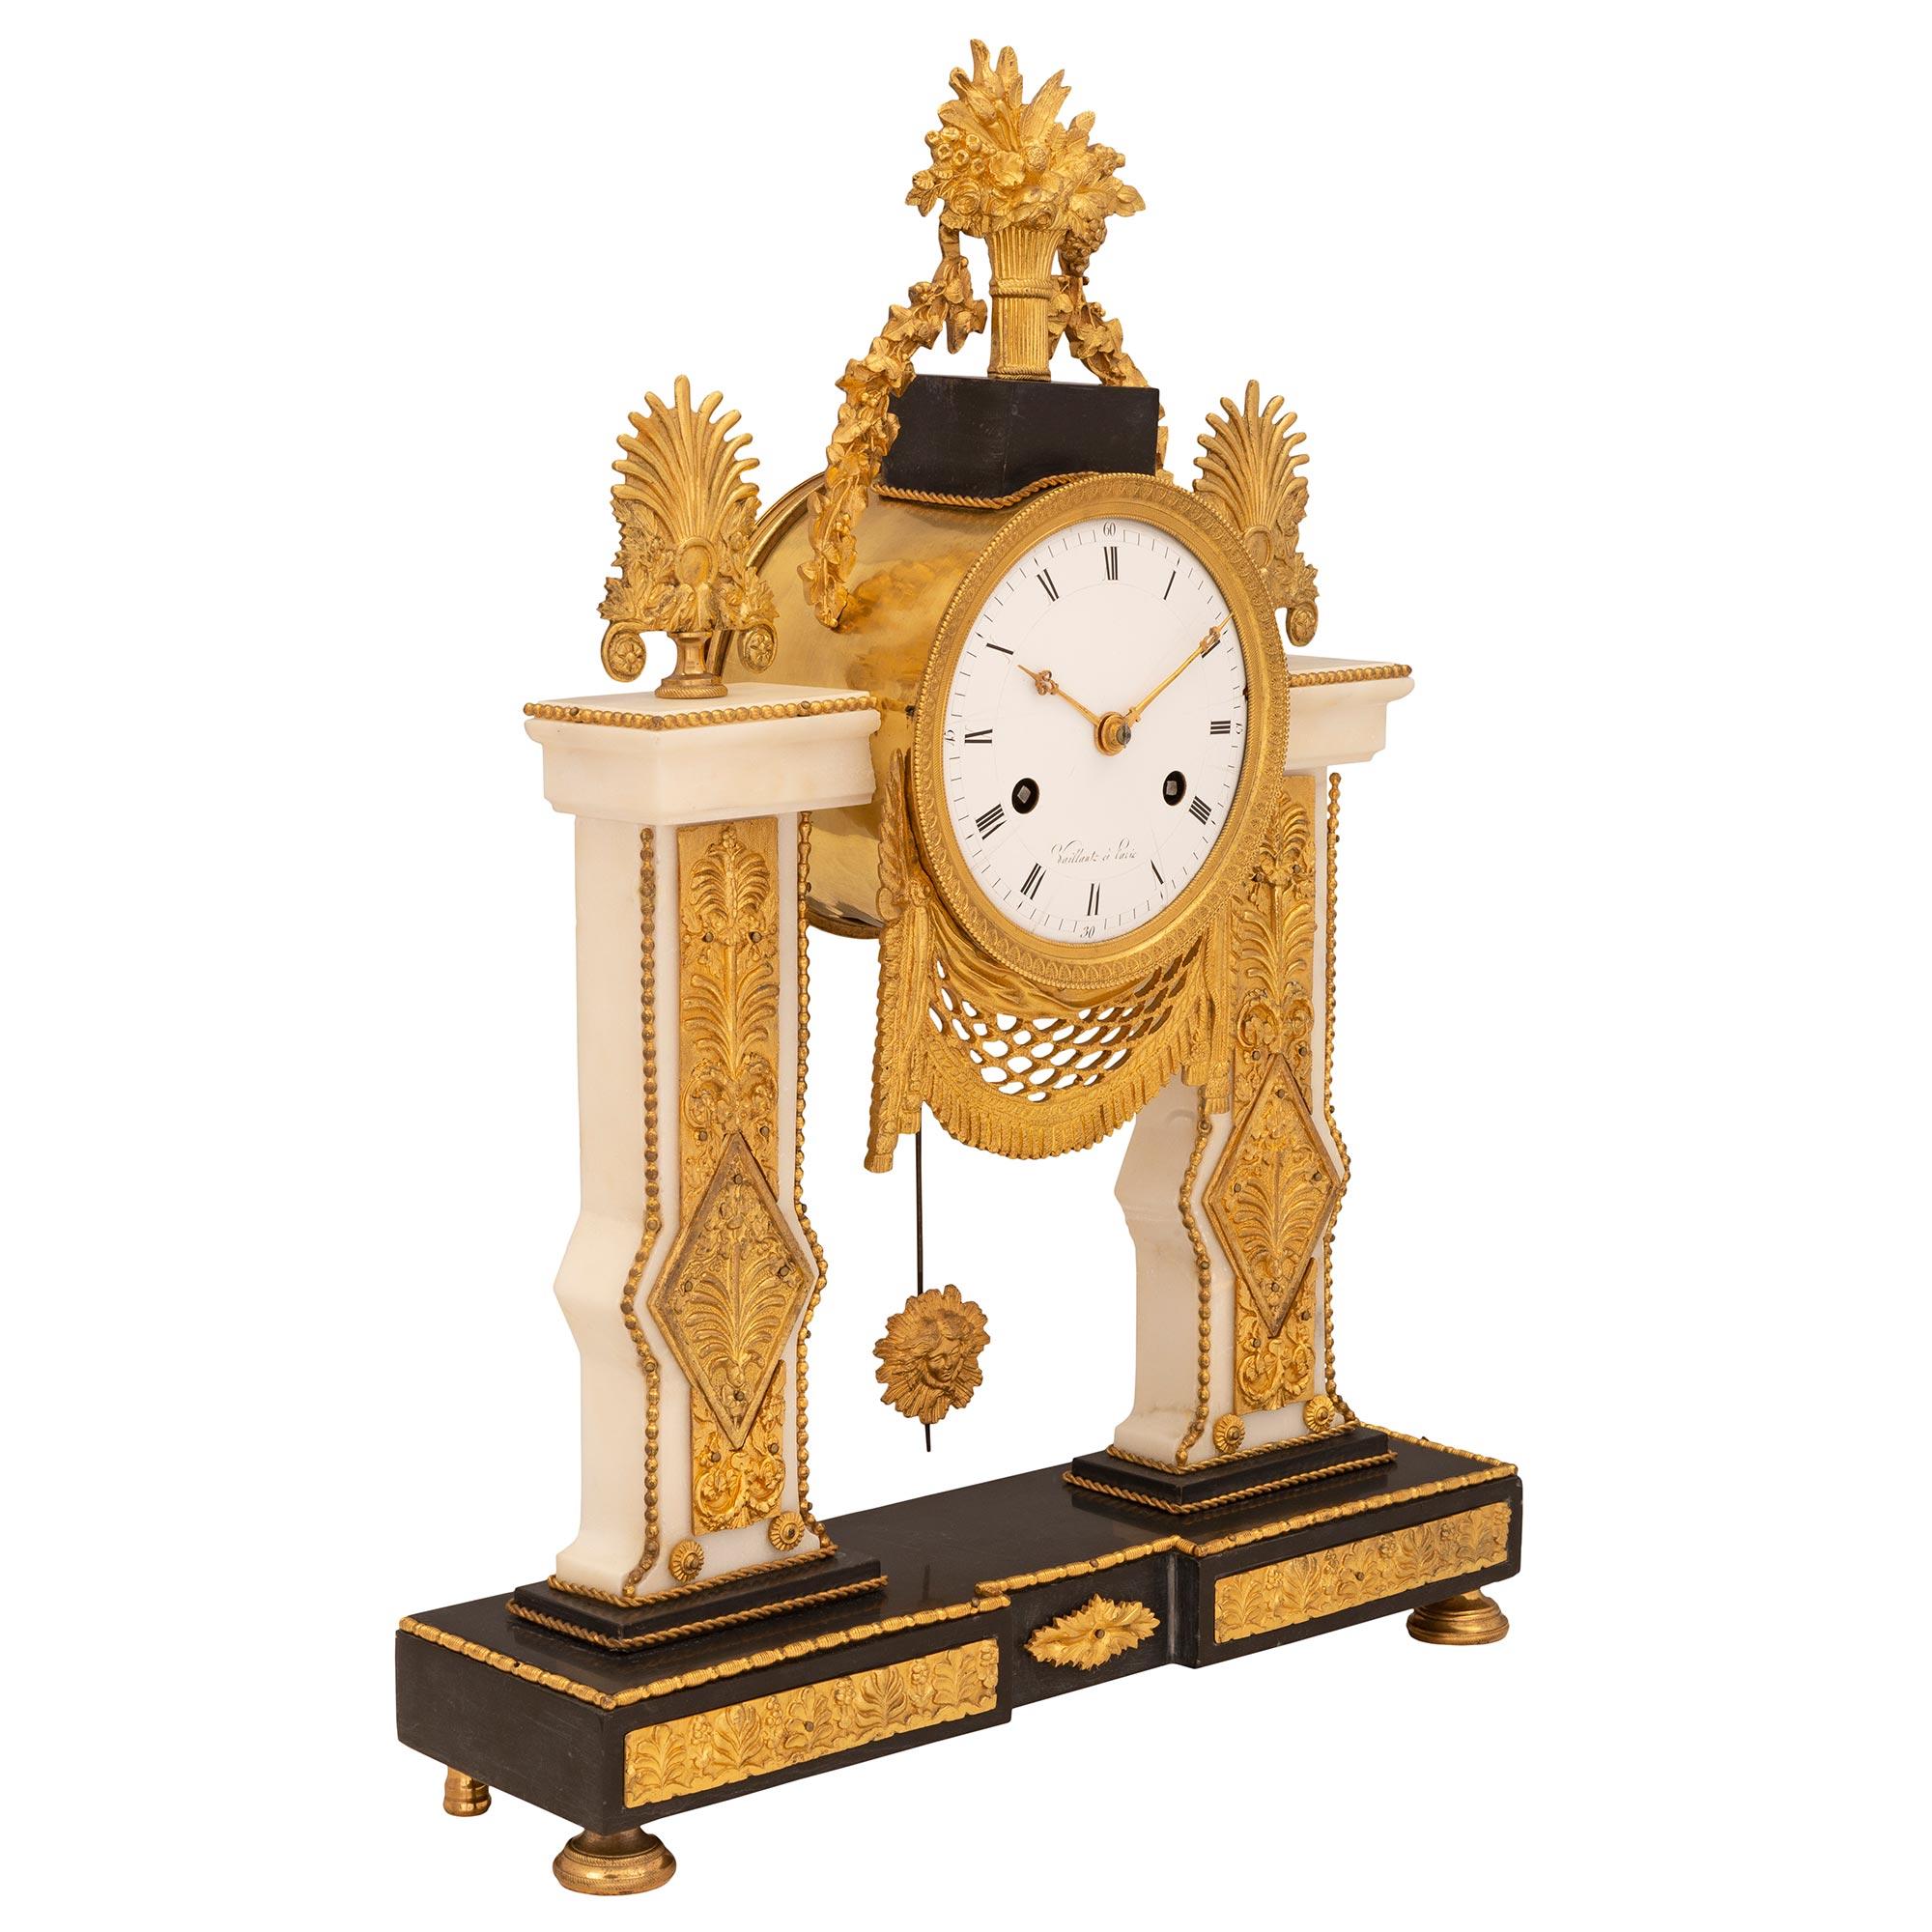 A striking French 19th century Neo-Classical st. ormolu, black Belgian and white Carrara marble clock, signed Vaillant à Paris. The clock is raised by a black Belgian marble base with fine ormolu topie feet and striking fitted ormolu plaques with